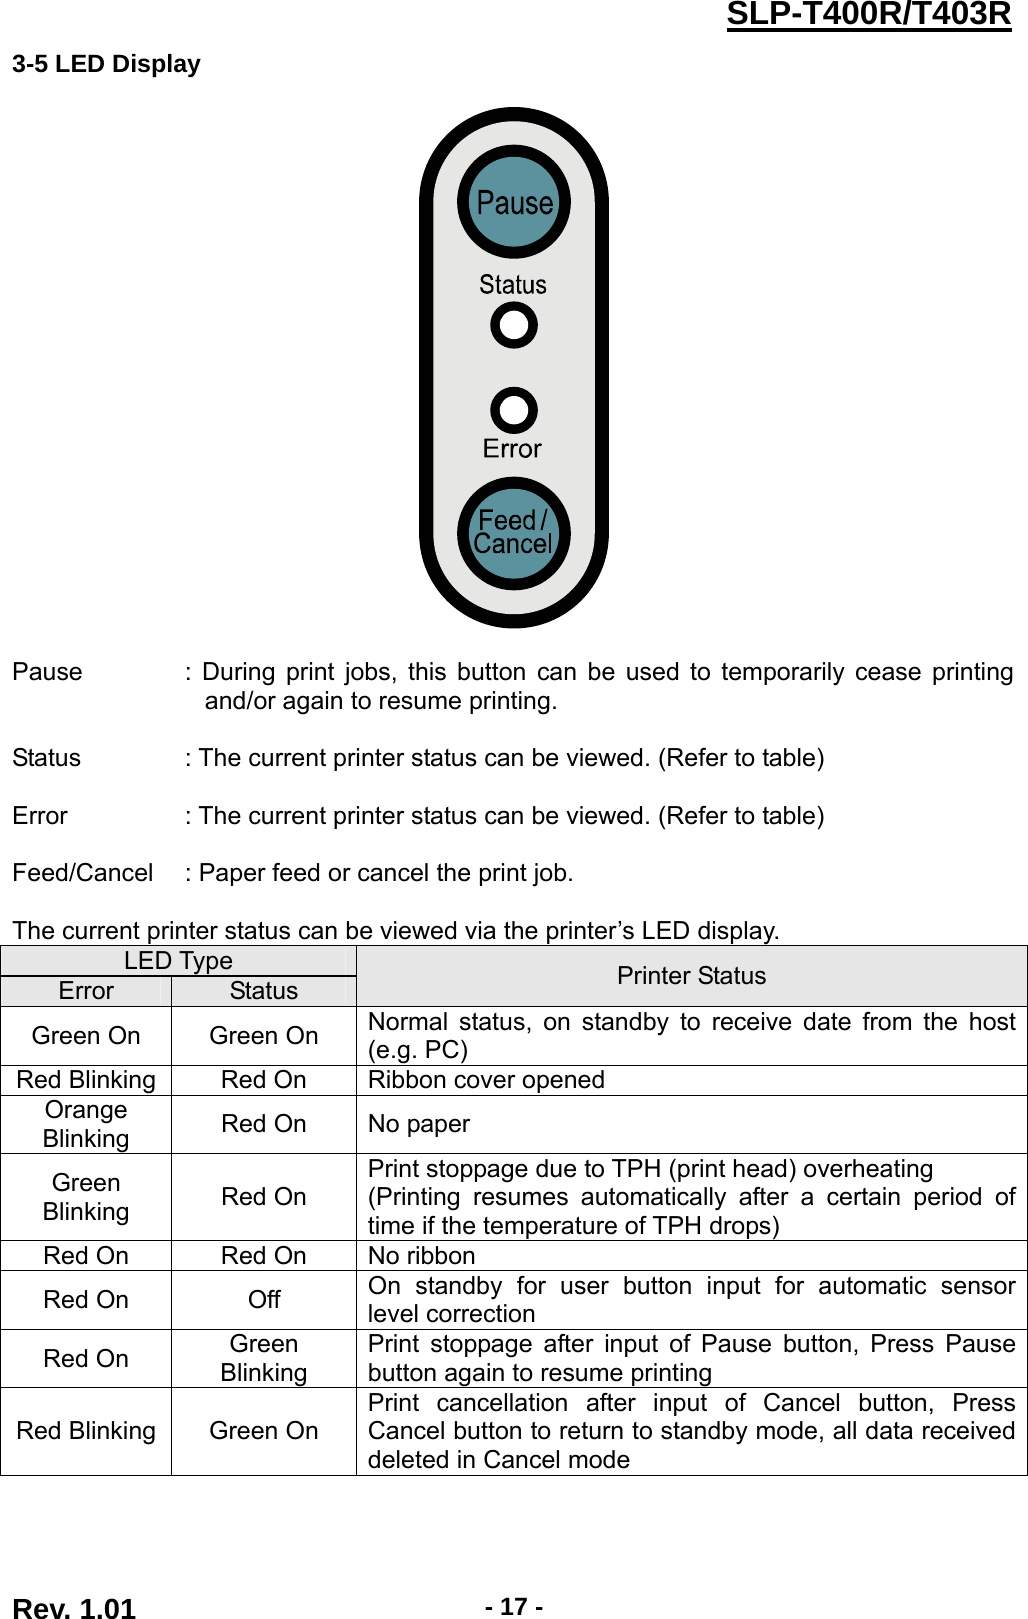  Rev. 1.01  - 17 -SLP-T400R/T403R3-5 LED Display    Pause   Status  Error  Feed/Cancel : During print jobs, this button can be used to temporarily cease printing and/or again to resume printing.  : The current printer status can be viewed. (Refer to table)  : The current printer status can be viewed. (Refer to table)  : Paper feed or cancel the print job.  The current printer status can be viewed via the printer’s LED display. LED Type Error  Status  Printer Status Green On  Green On  Normal status, on standby to receive date from the host (e.g. PC) Red Blinking  Red On  Ribbon cover opened Orange Blinking  Red On  No paper Green Blinking  Red On Print stoppage due to TPH (print head) overheating (Printing resumes automatically after a certain period of time if the temperature of TPH drops) Red On  Red On  No ribbon Red On  Off  On standby for user button input for automatic sensor level correction Red On  Green Blinking Print stoppage after input of Pause button, Press Pause button again to resume printing Red Blinking  Green On Print cancellation after input of Cancel button, Press Cancel button to return to standby mode, all data received deleted in Cancel mode 